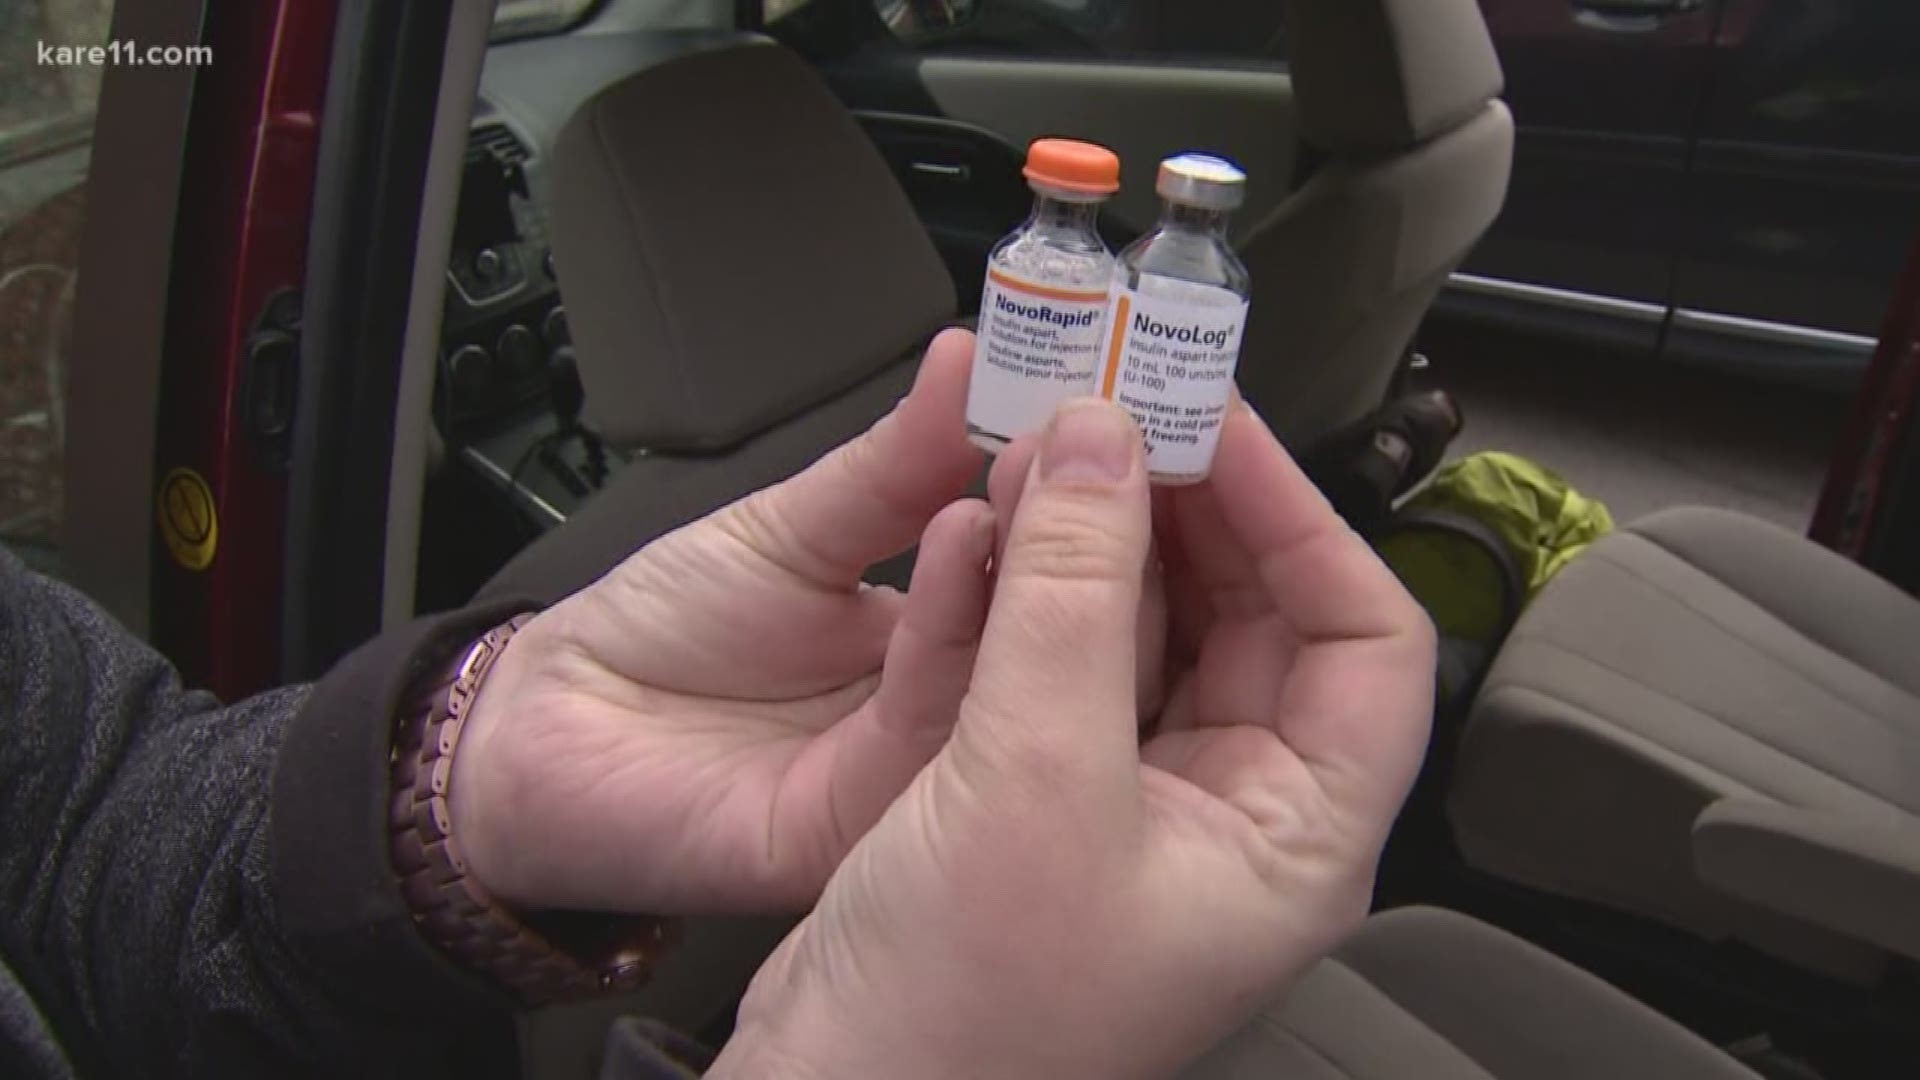 It's a hot topic on the road to the white house and one that many Minnesota families care about deeply. Gordon Severson shows us how people in Minnesota are keeping the pressure on lawmakers to make the life-saving drug cheaper.